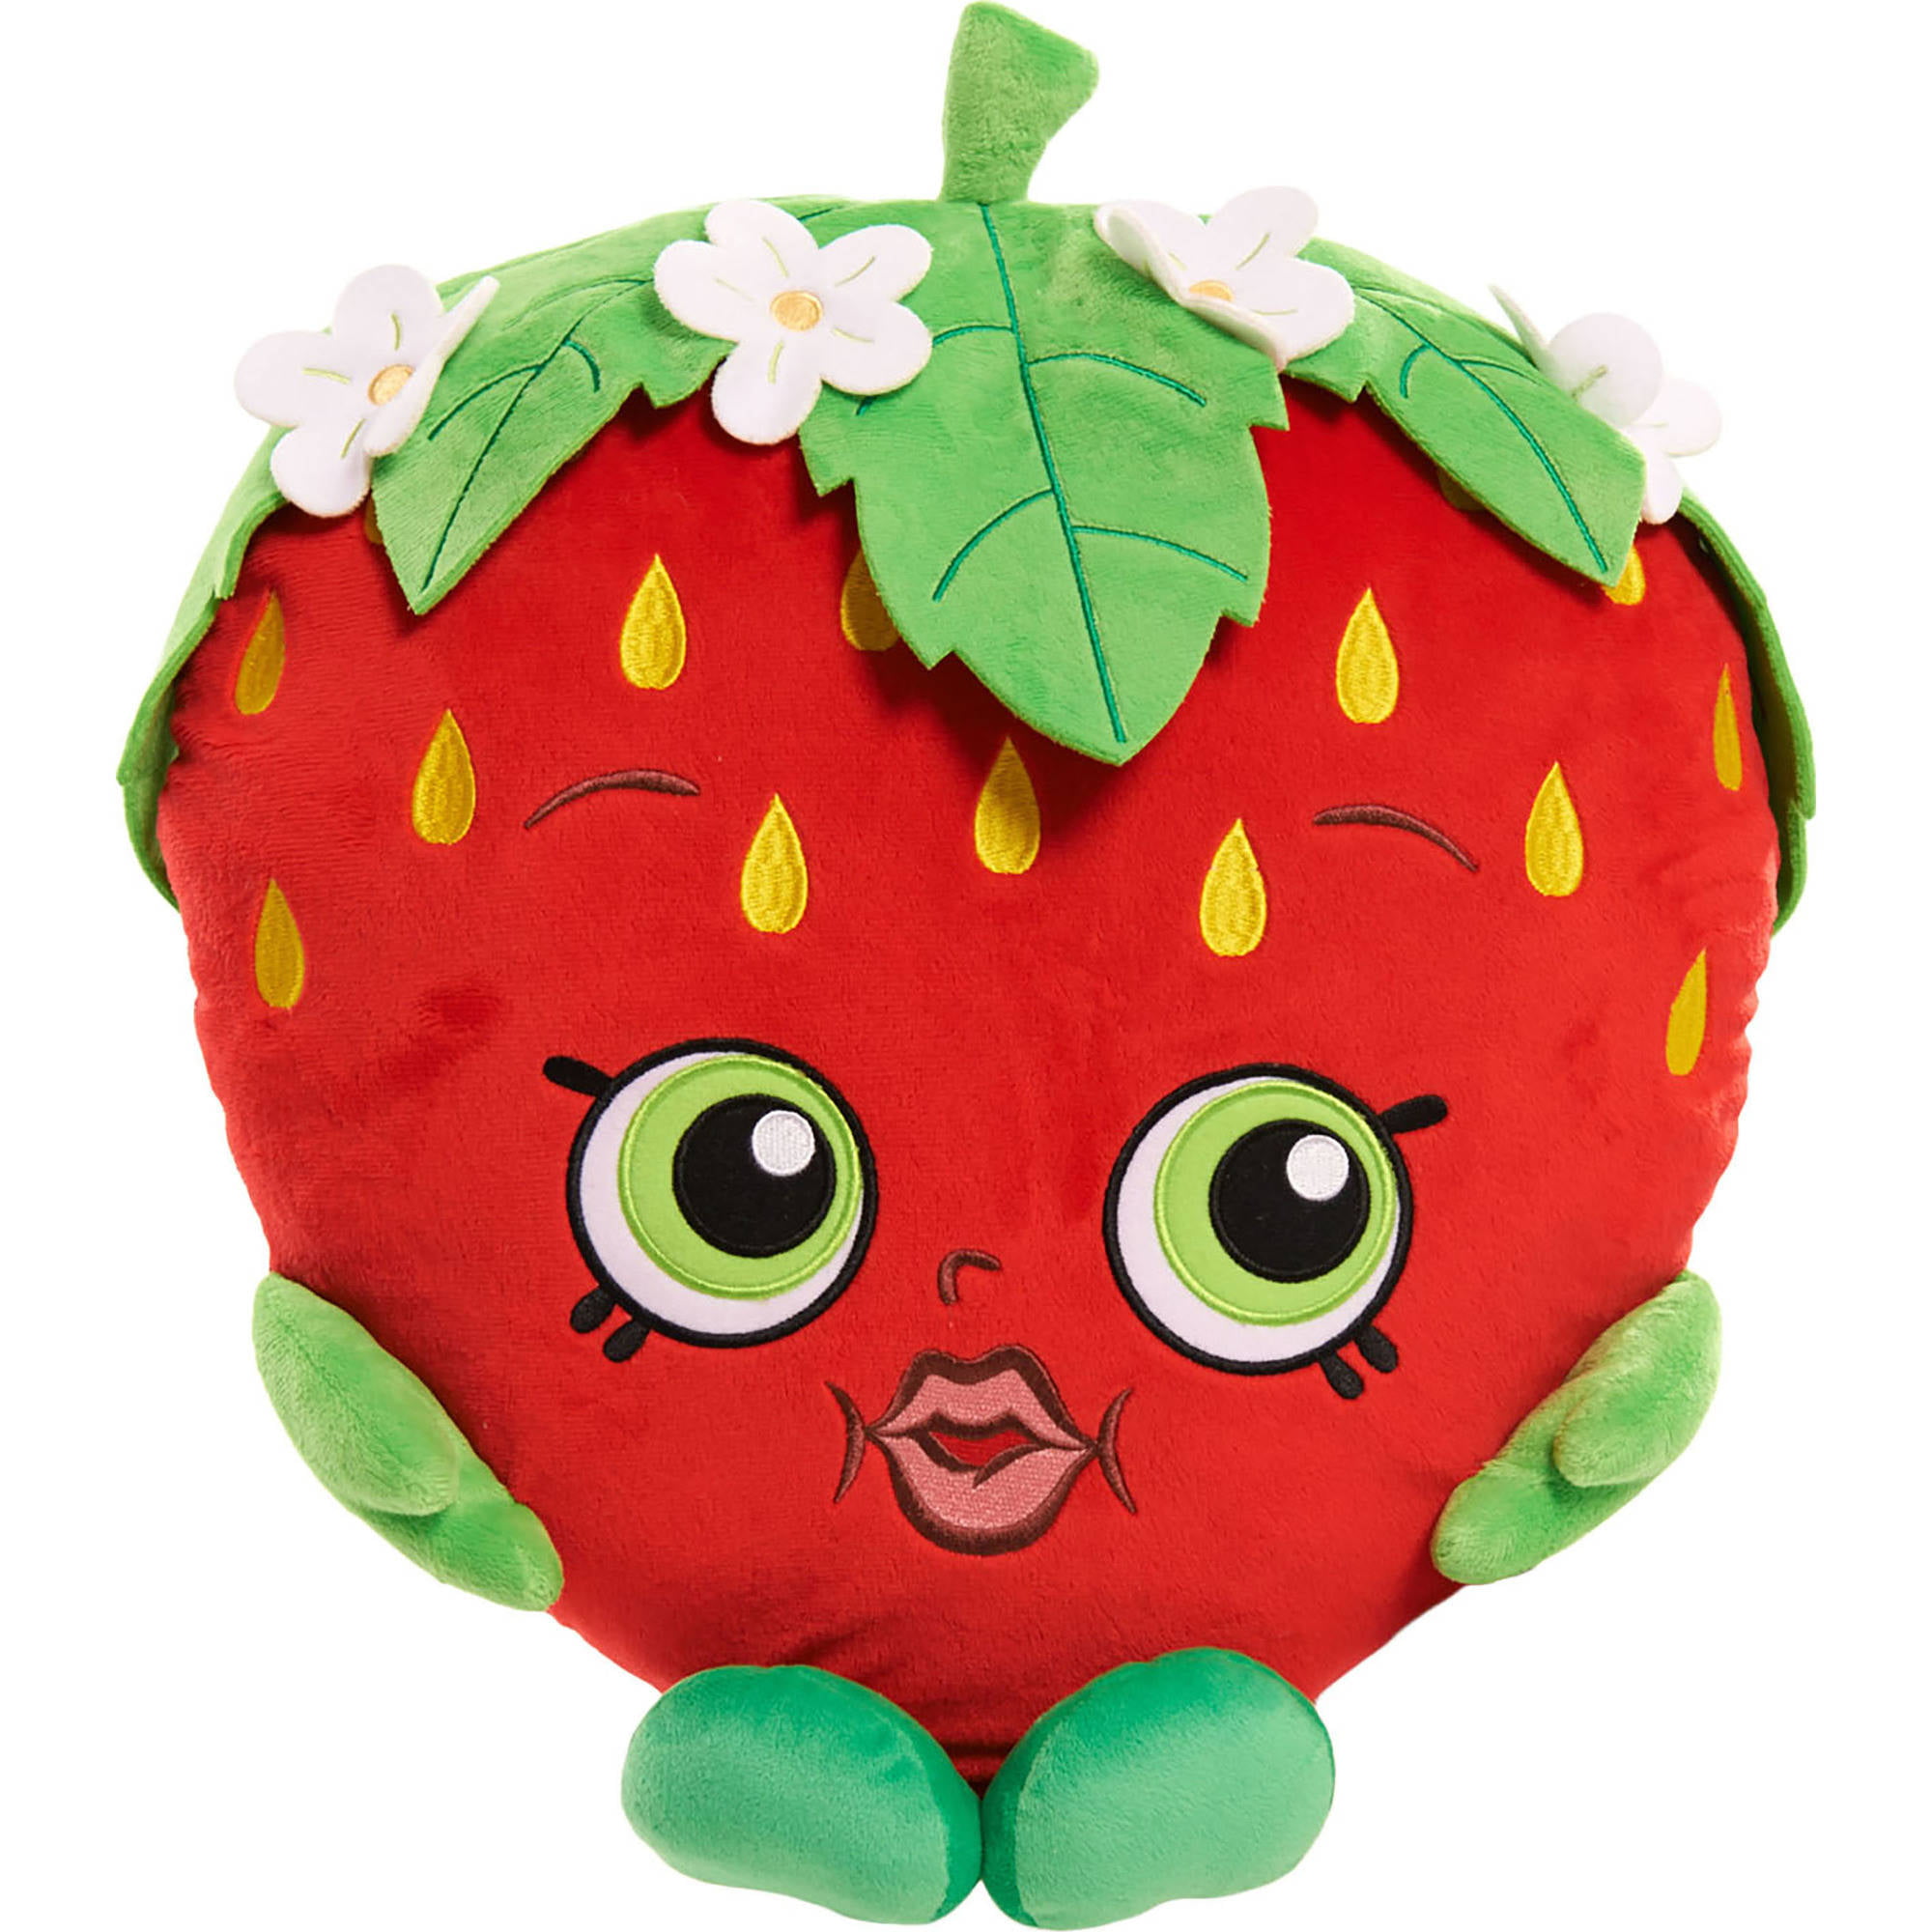 Shopkins Strawberry Kiss 6.5" Plush Brand New With Tags 